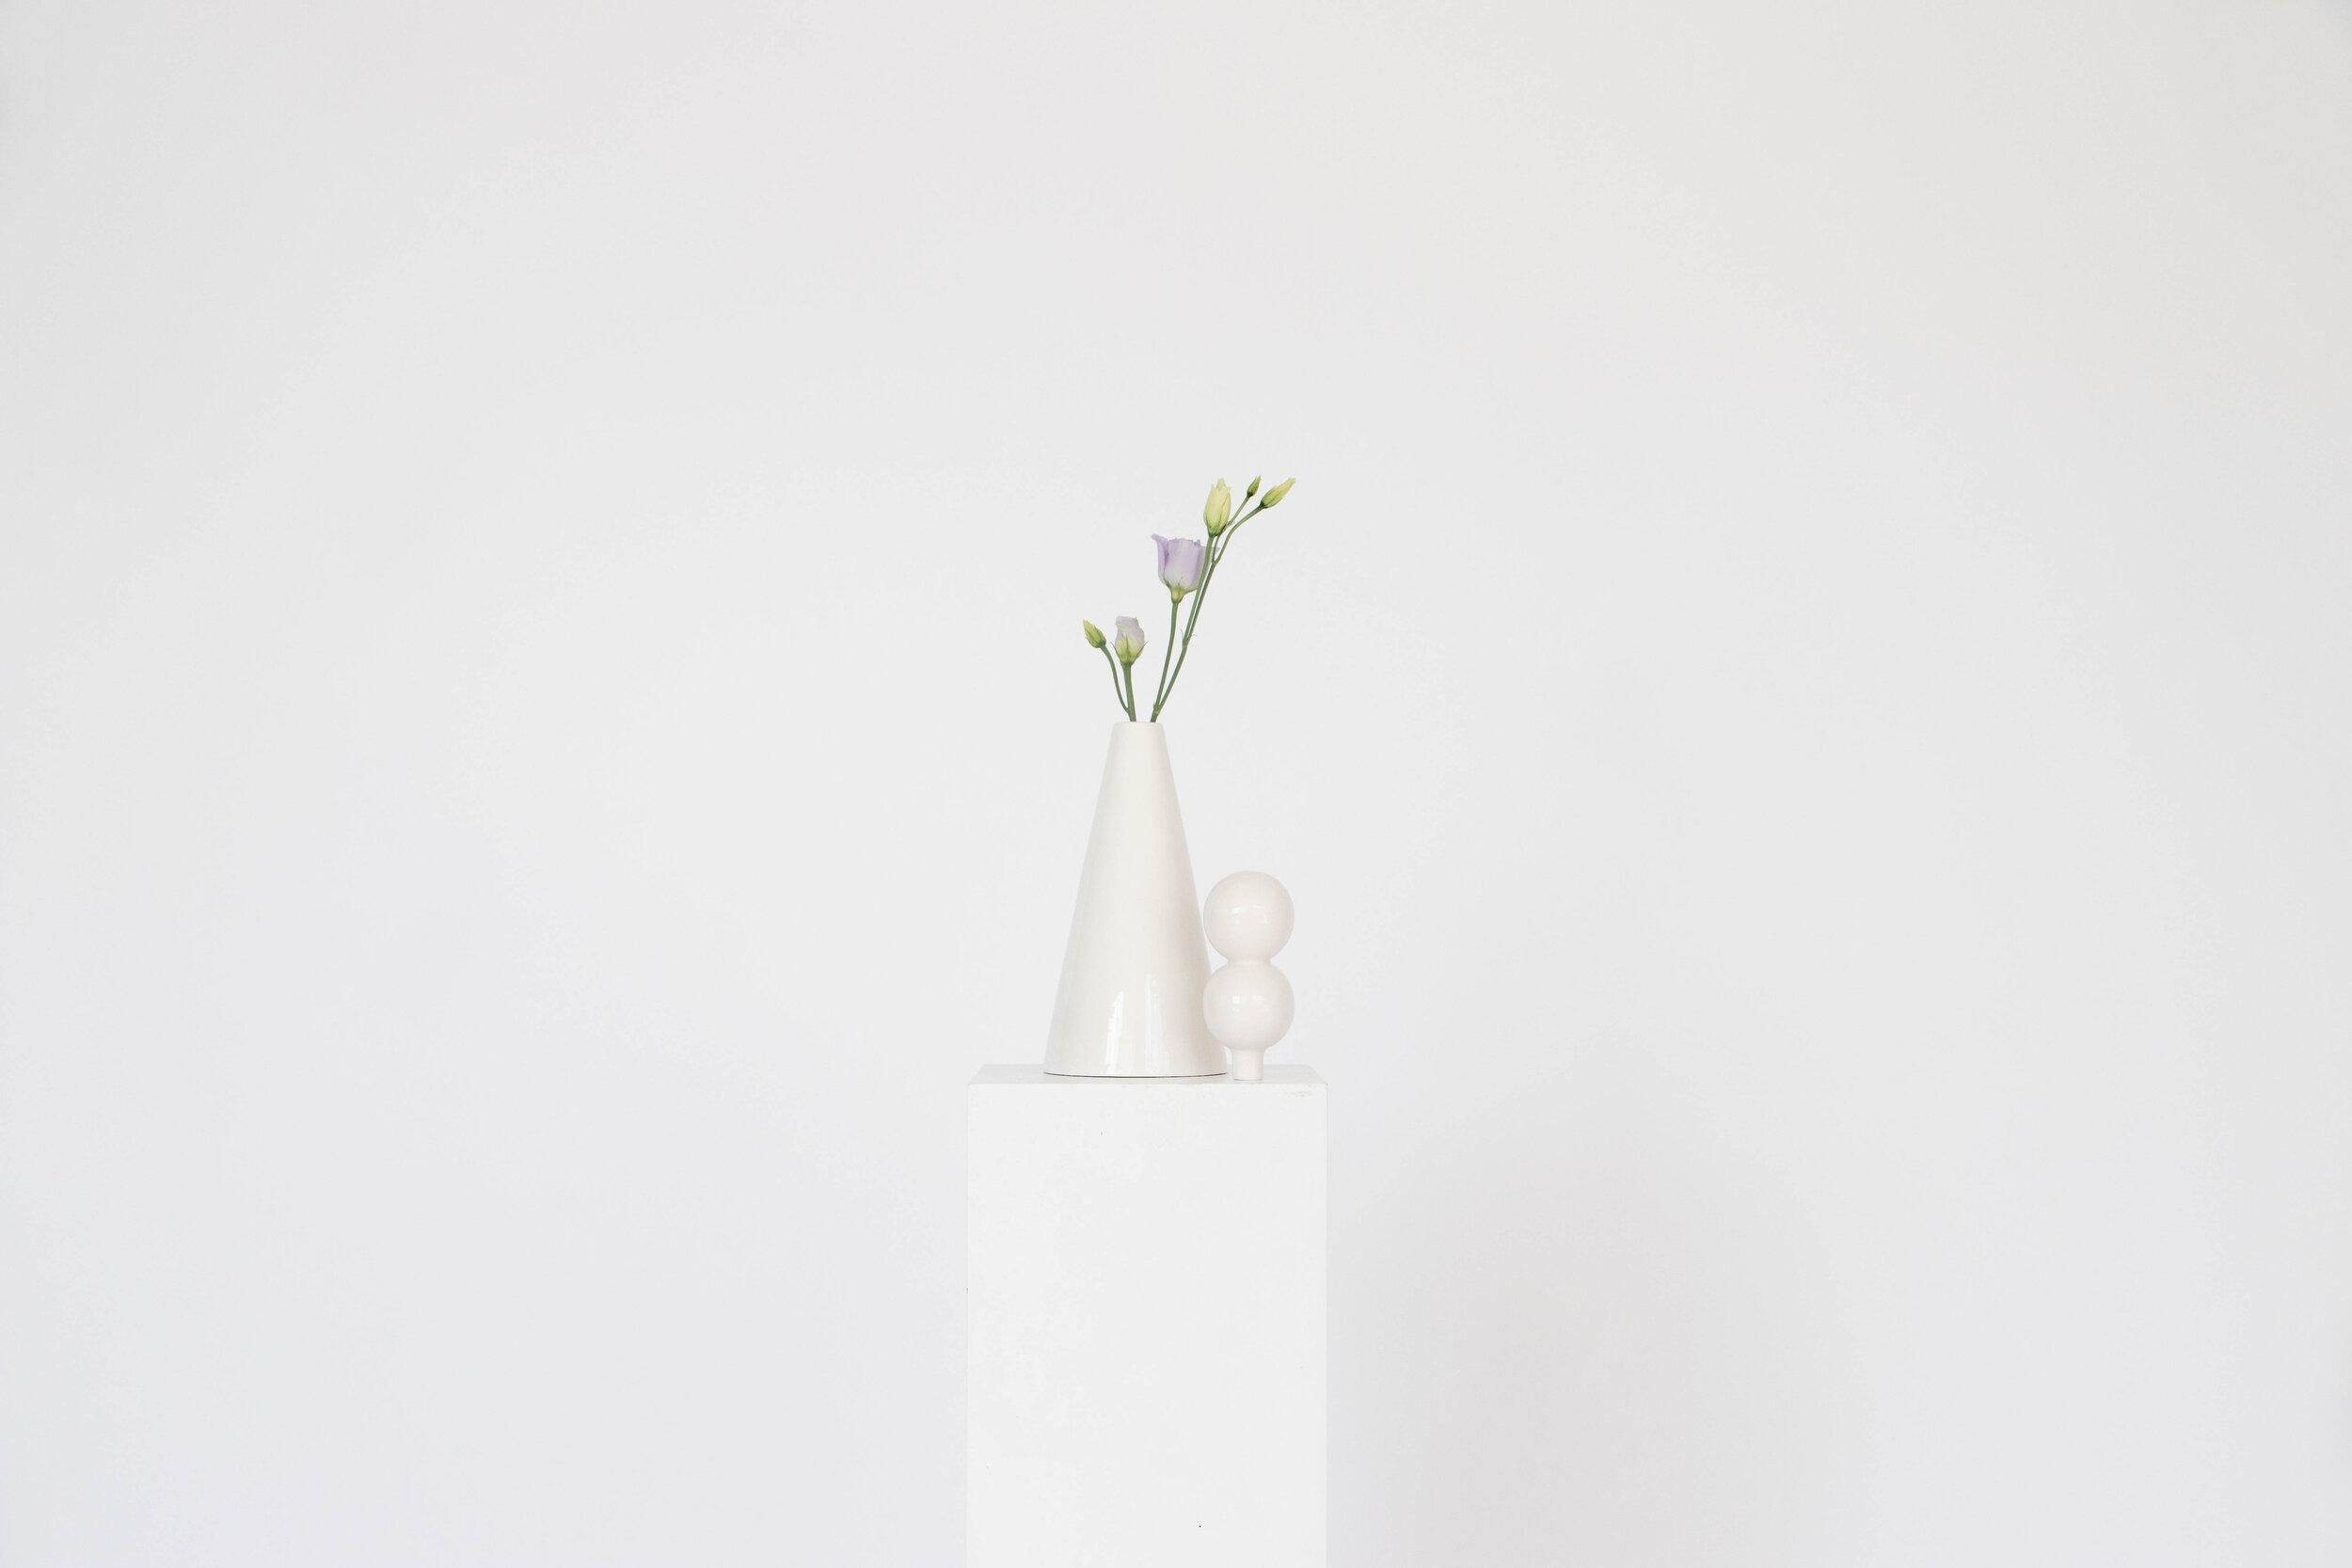 A Set of 8 White Glossy Kaori Vases by Valeria Vasi
Handmade in Barcelona, 2021
Materials: stoneware, clay
Dimensions: 30 x 10 cm
Also available in: terracotta, matt white. 

A sculptural stoneware vase entirely crafted in Barcelona by skilful